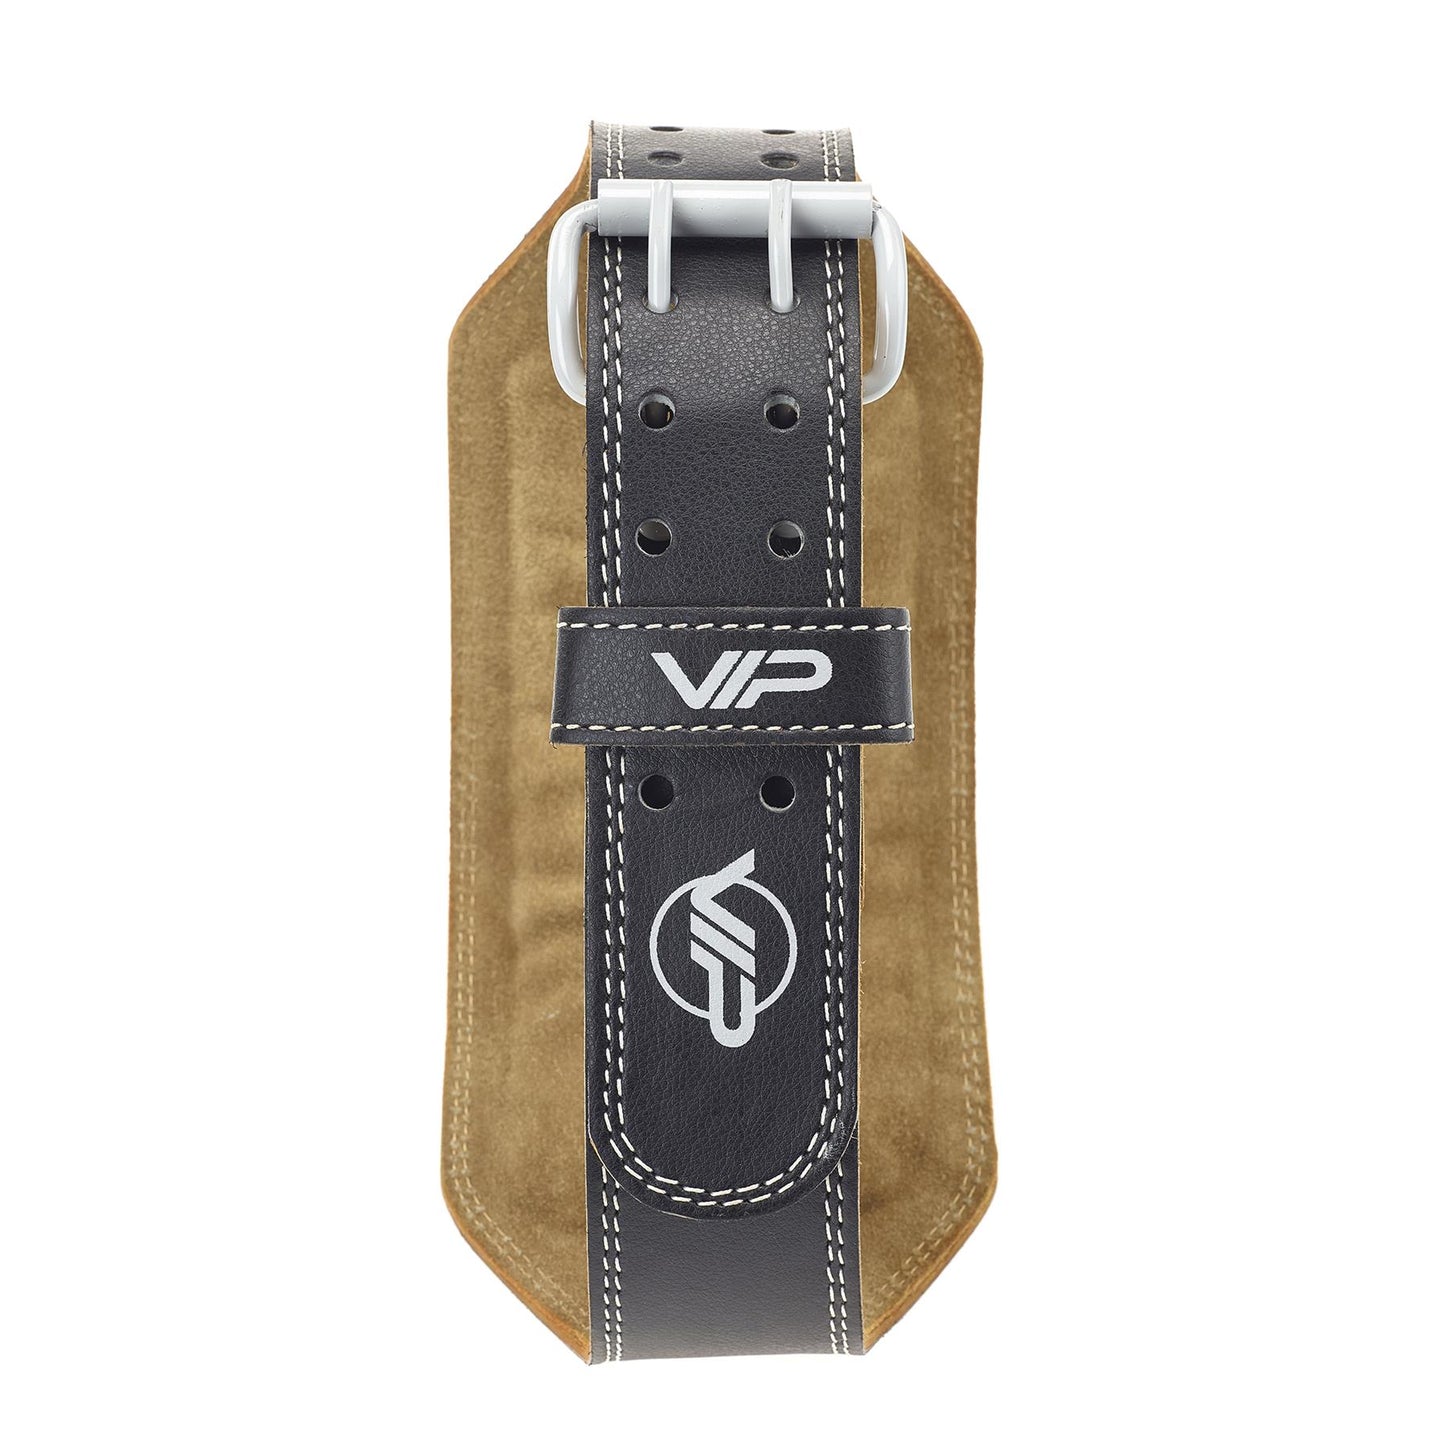 VIP Fitness Auxilium Plus Leather Padded Weight lifting Belt 6" Width